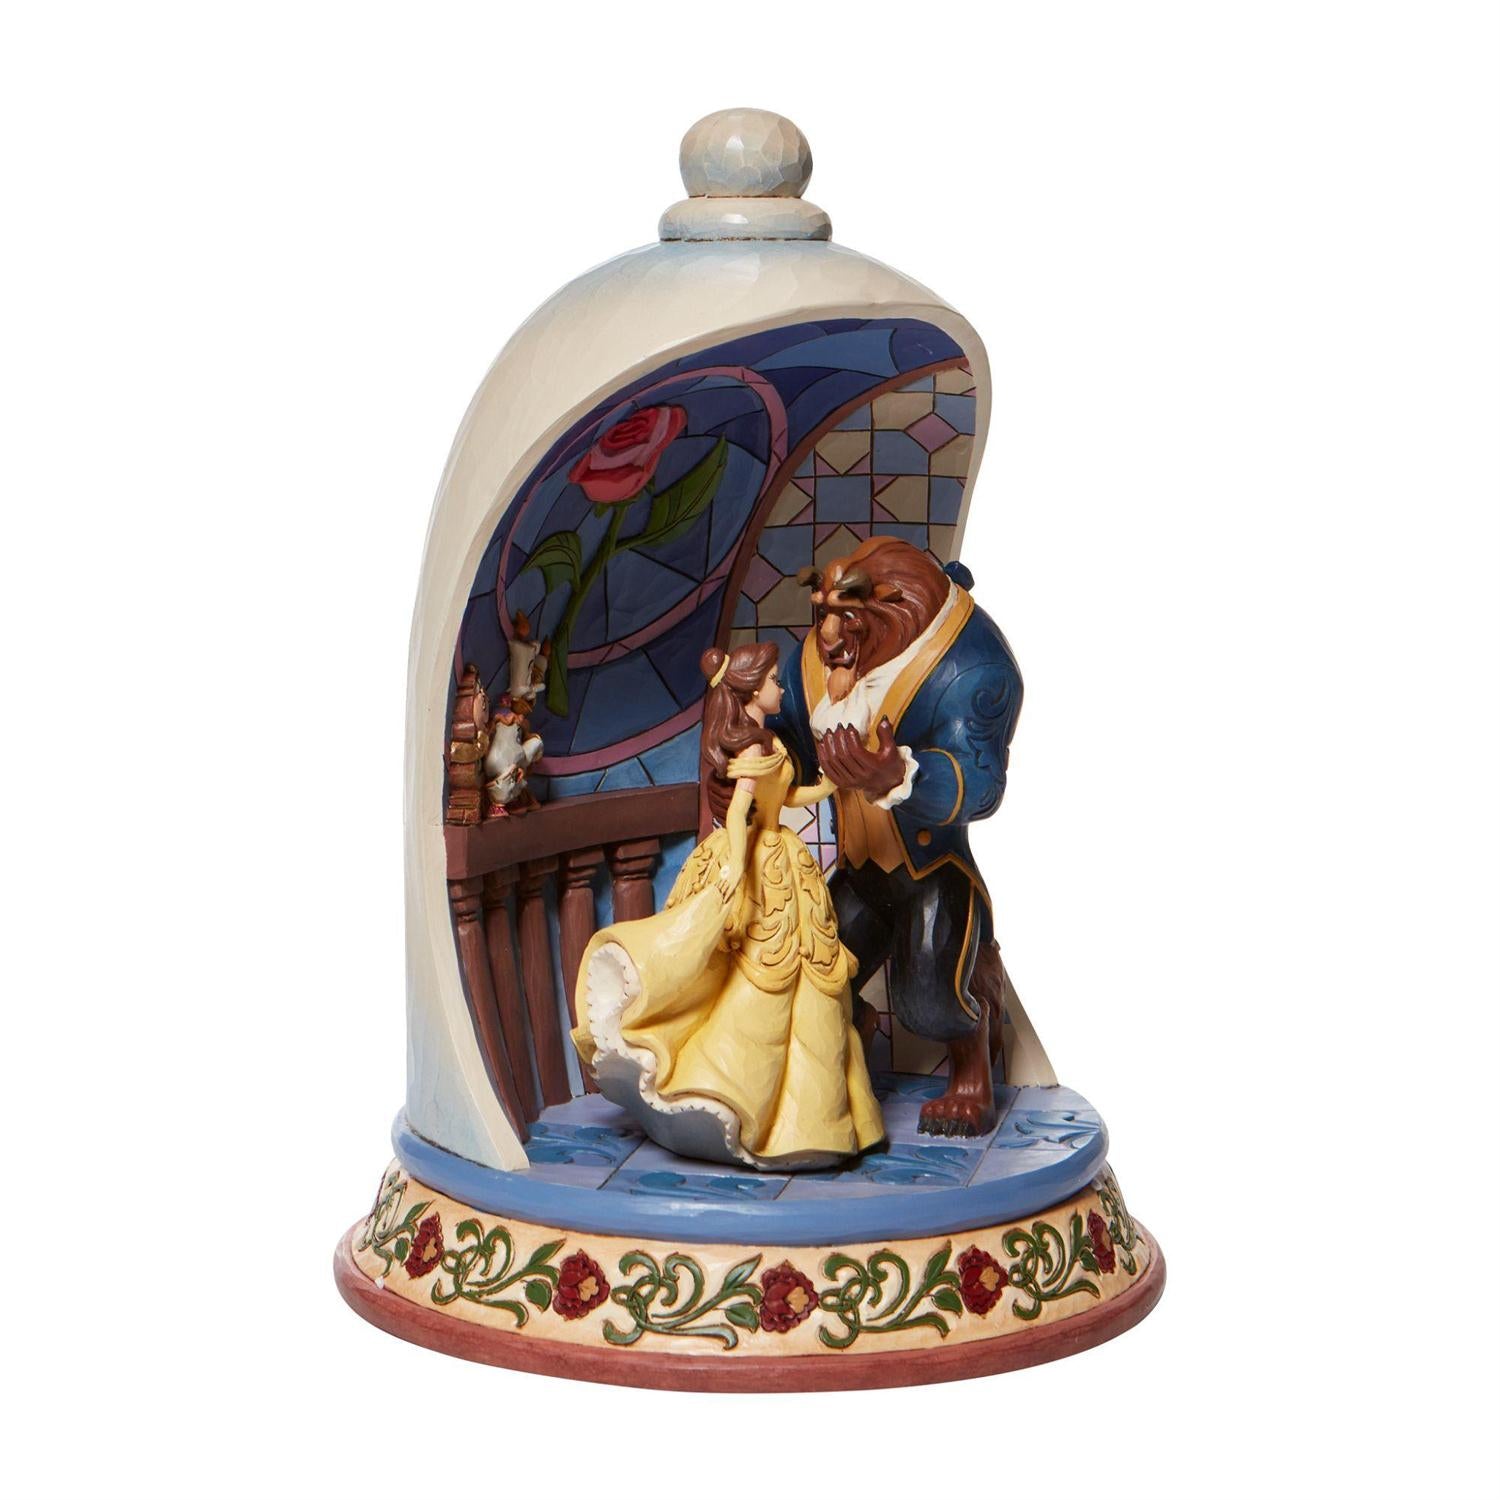  Lumiere, Cogsworth, and Mrs. Potts watch as Belle and the Beast share a moonlight waltz and loving gaze. - Side view